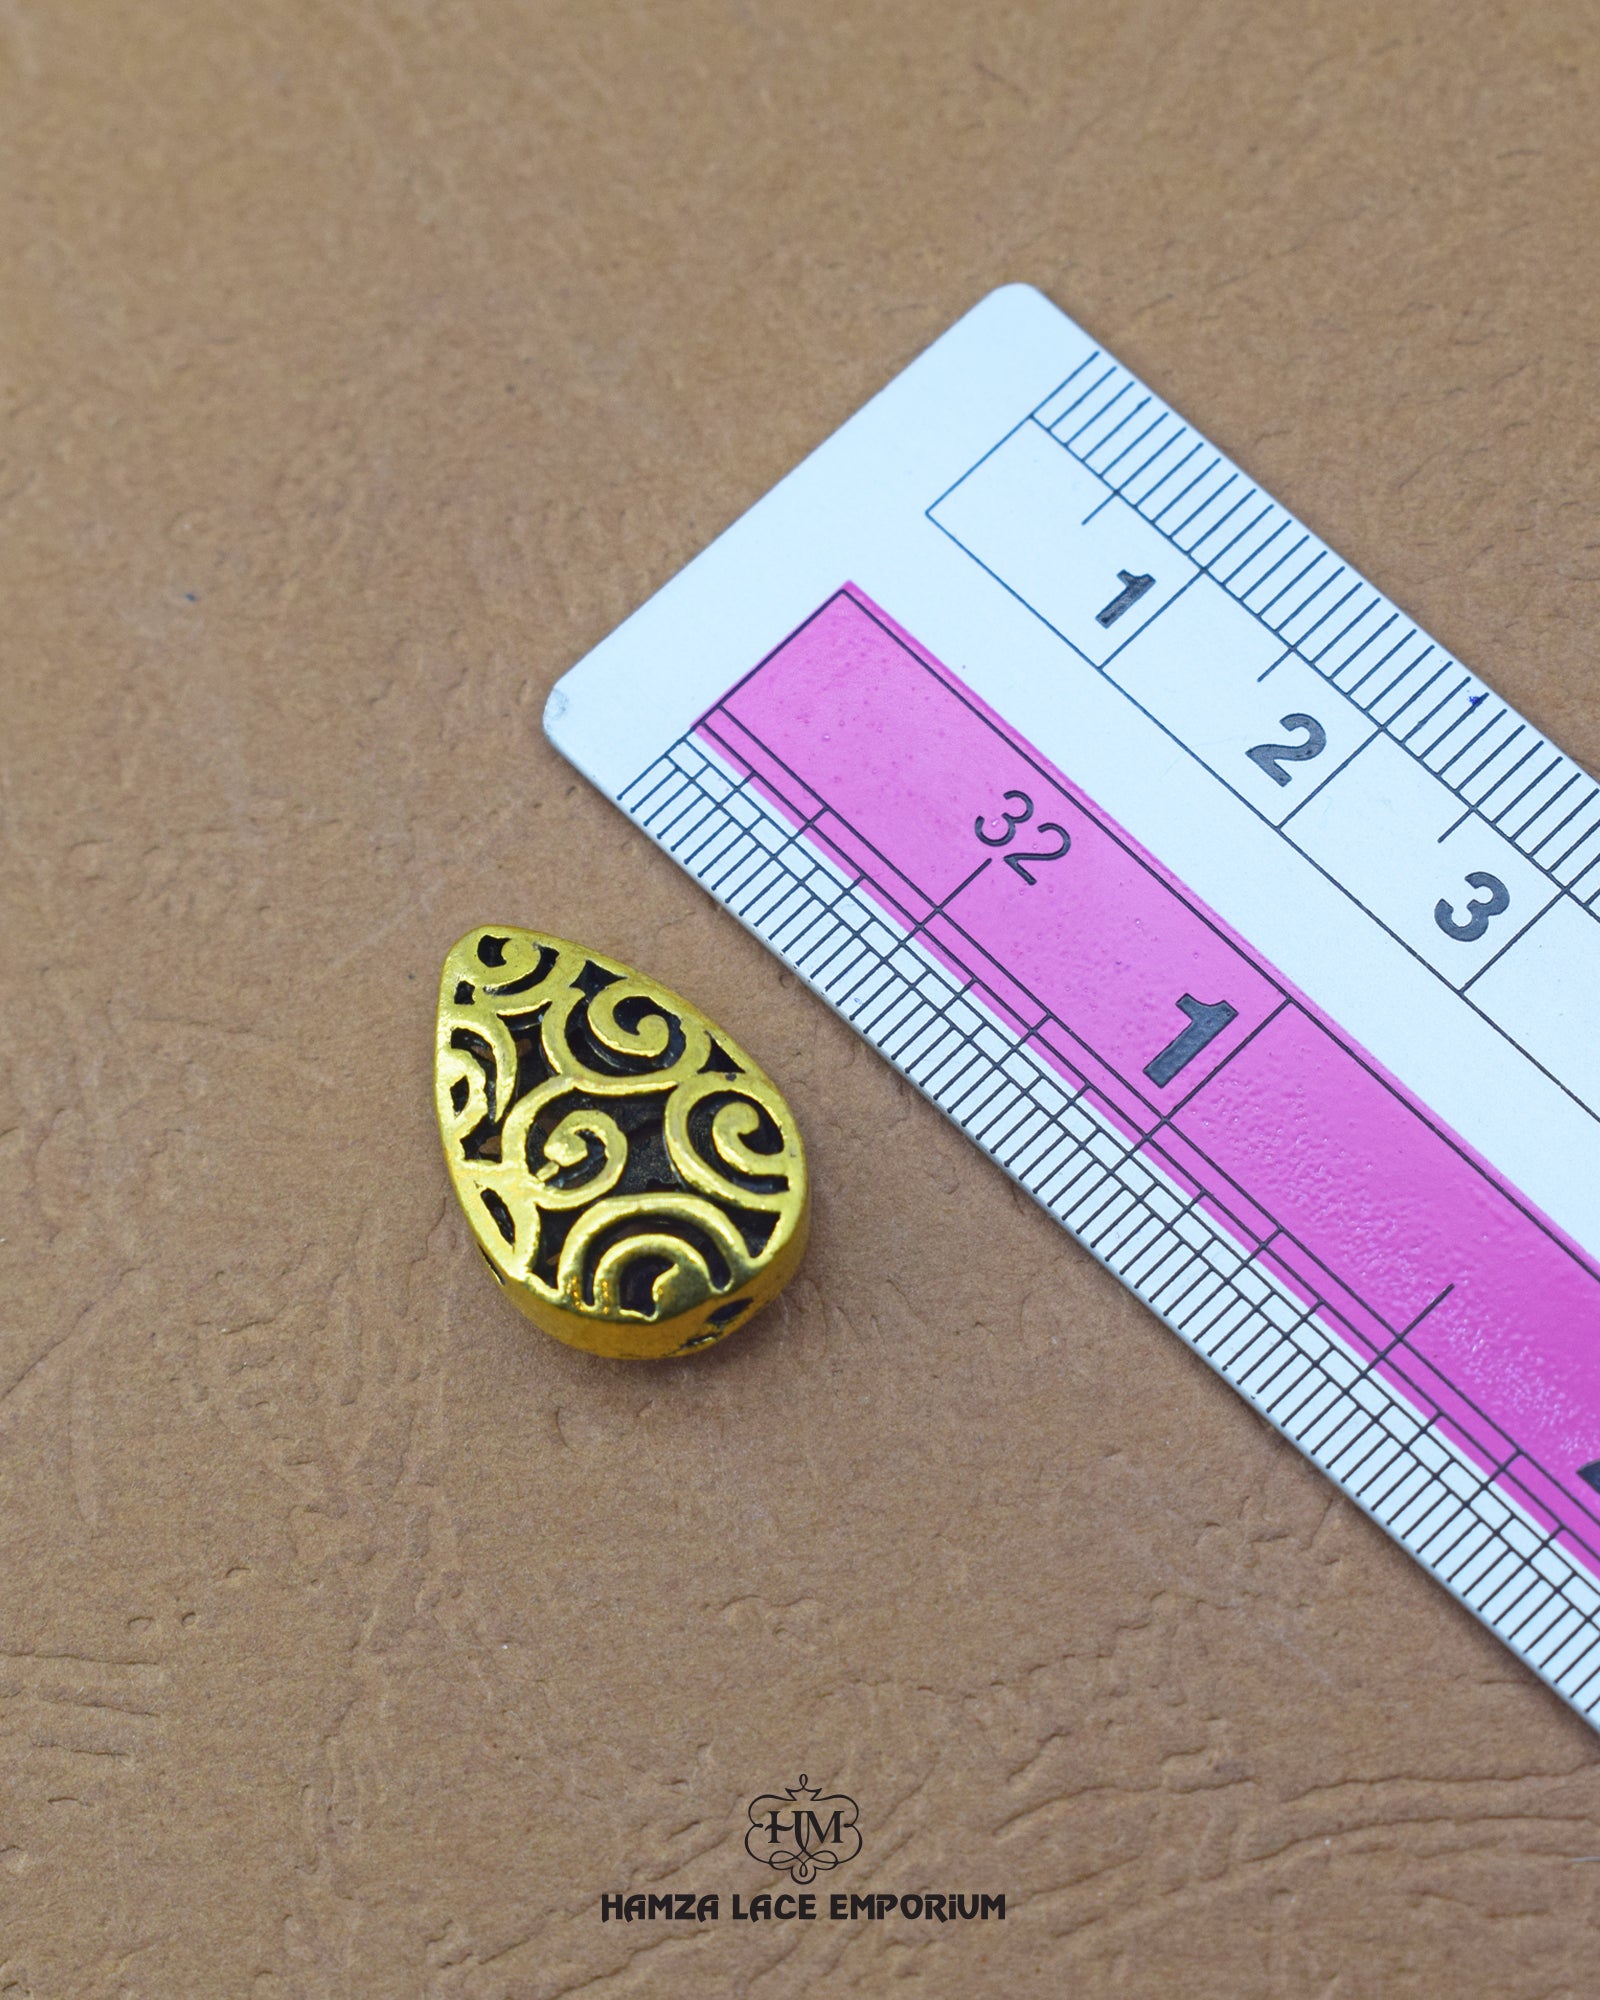 Elegant 'Drop Shape Button MA541' for Clothing (Size shown with ruler)